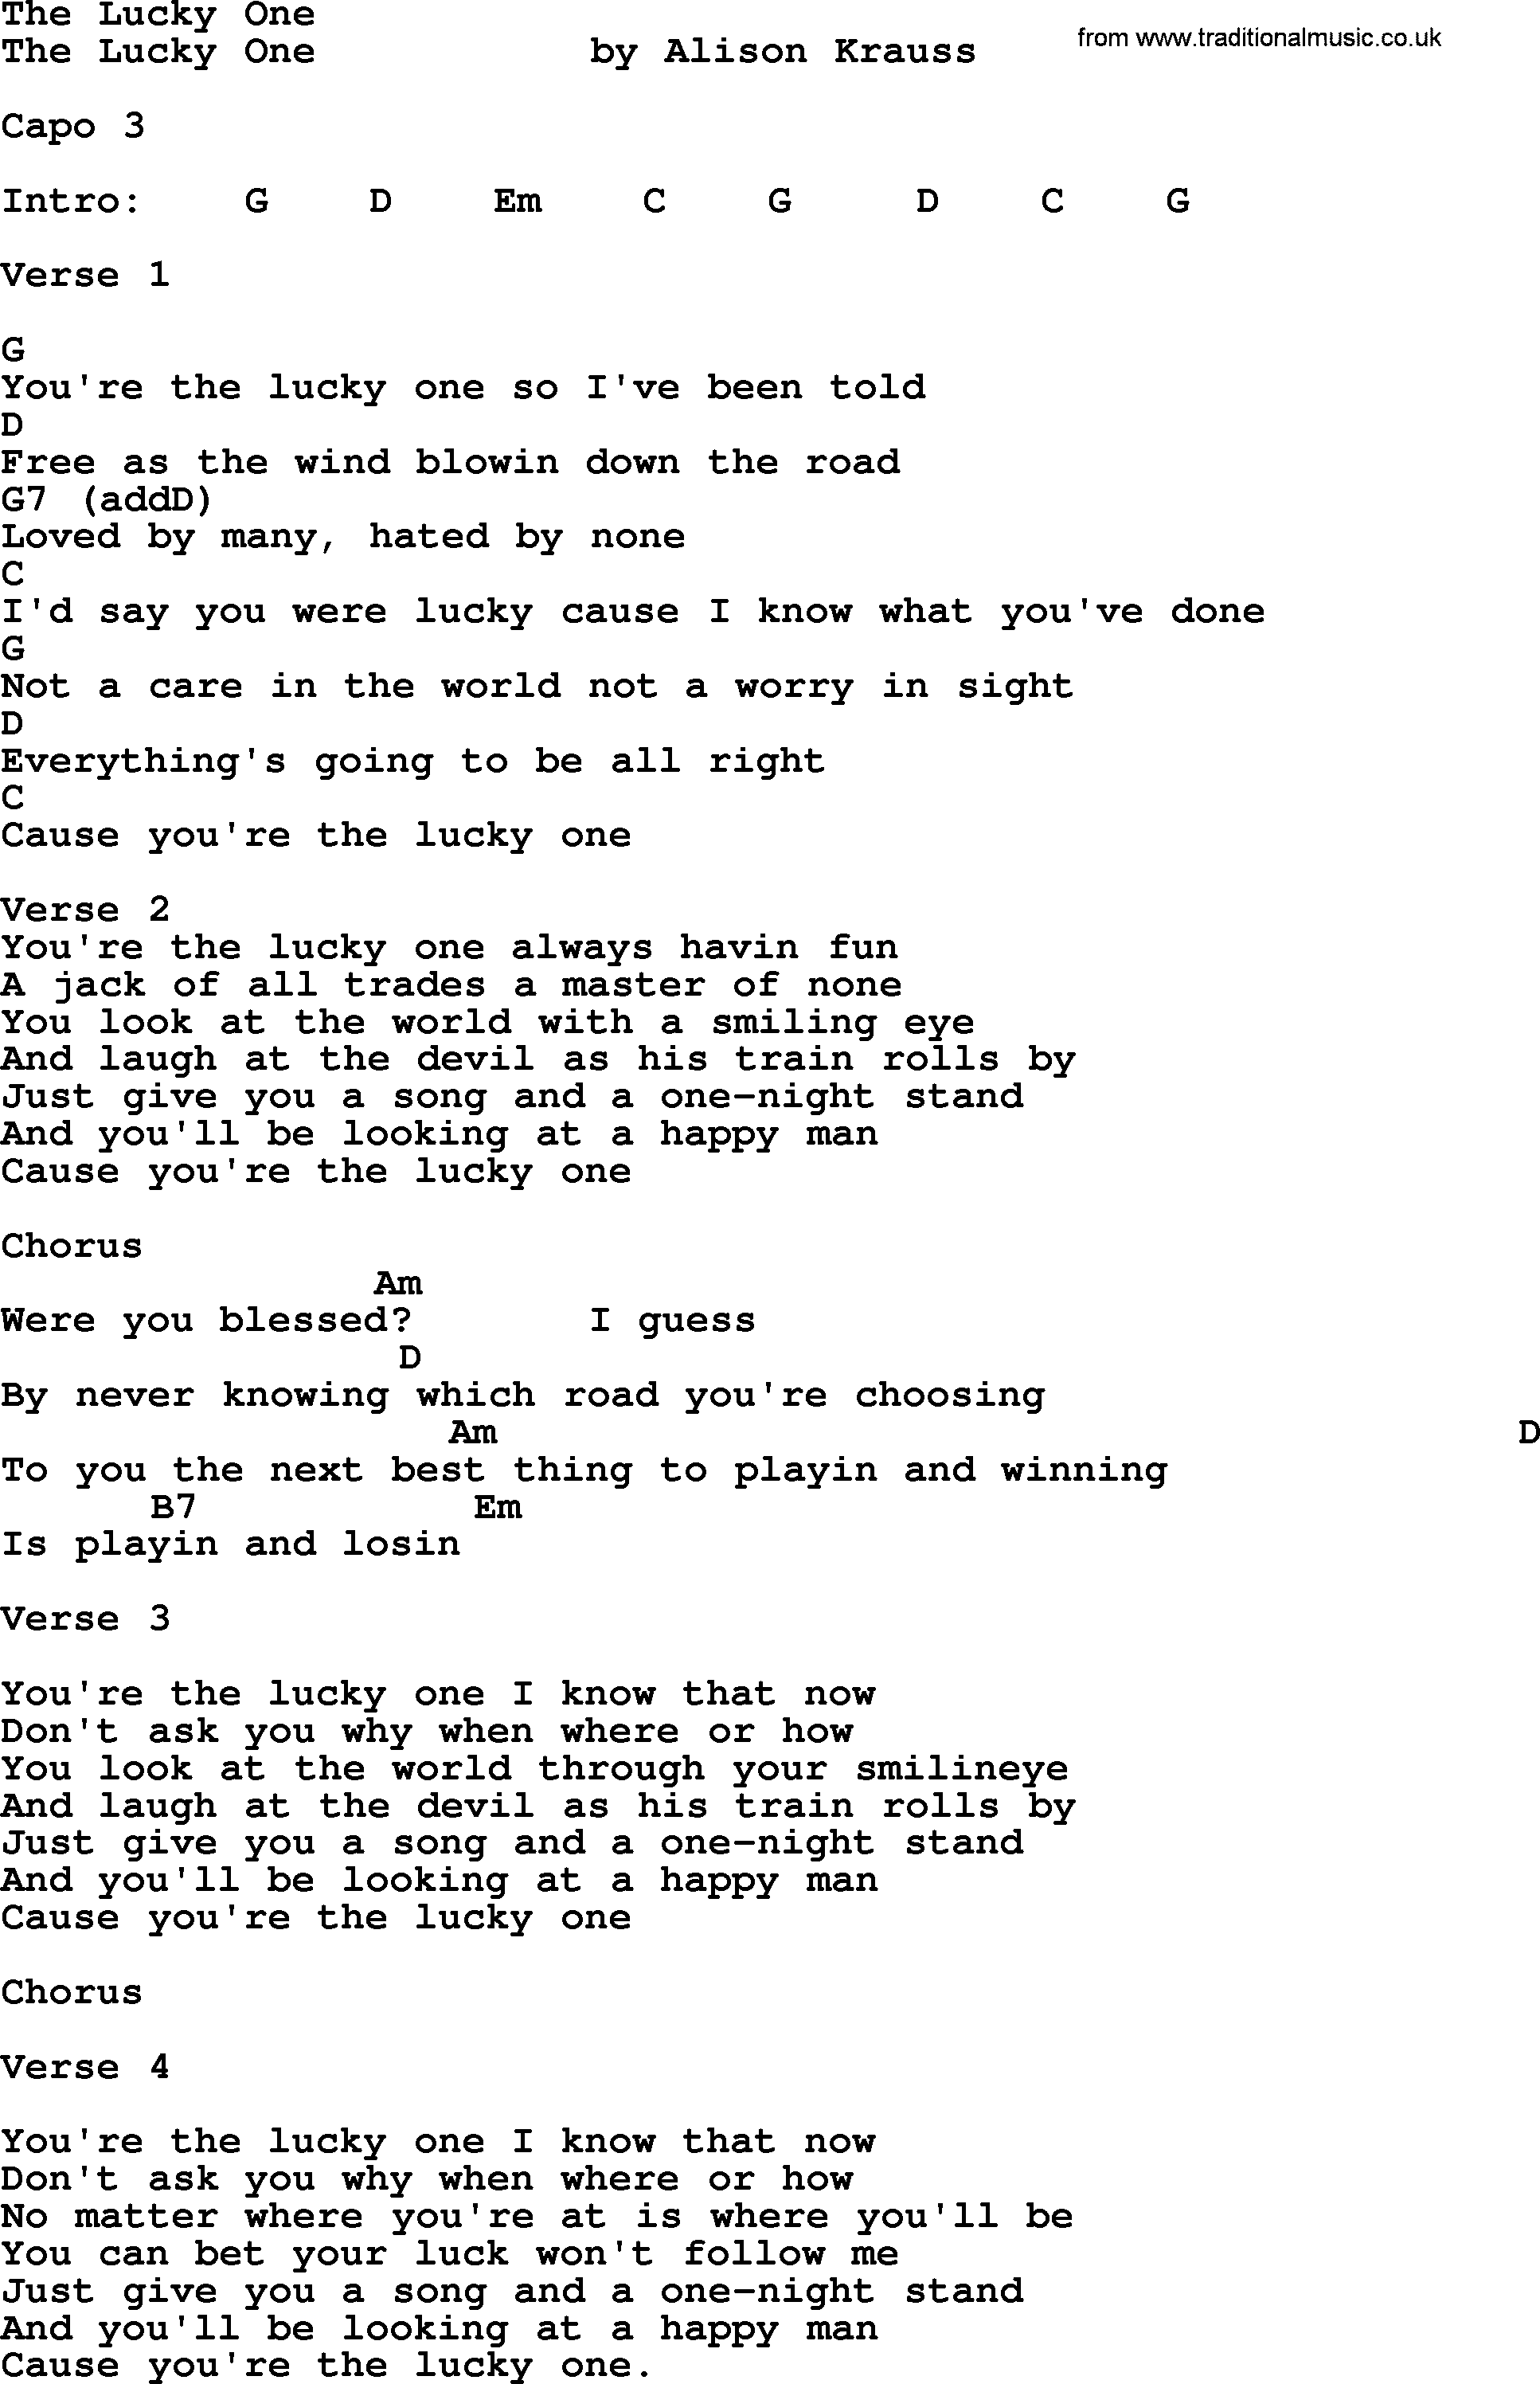 Bluegrass song: The Lucky One, lyrics and chords